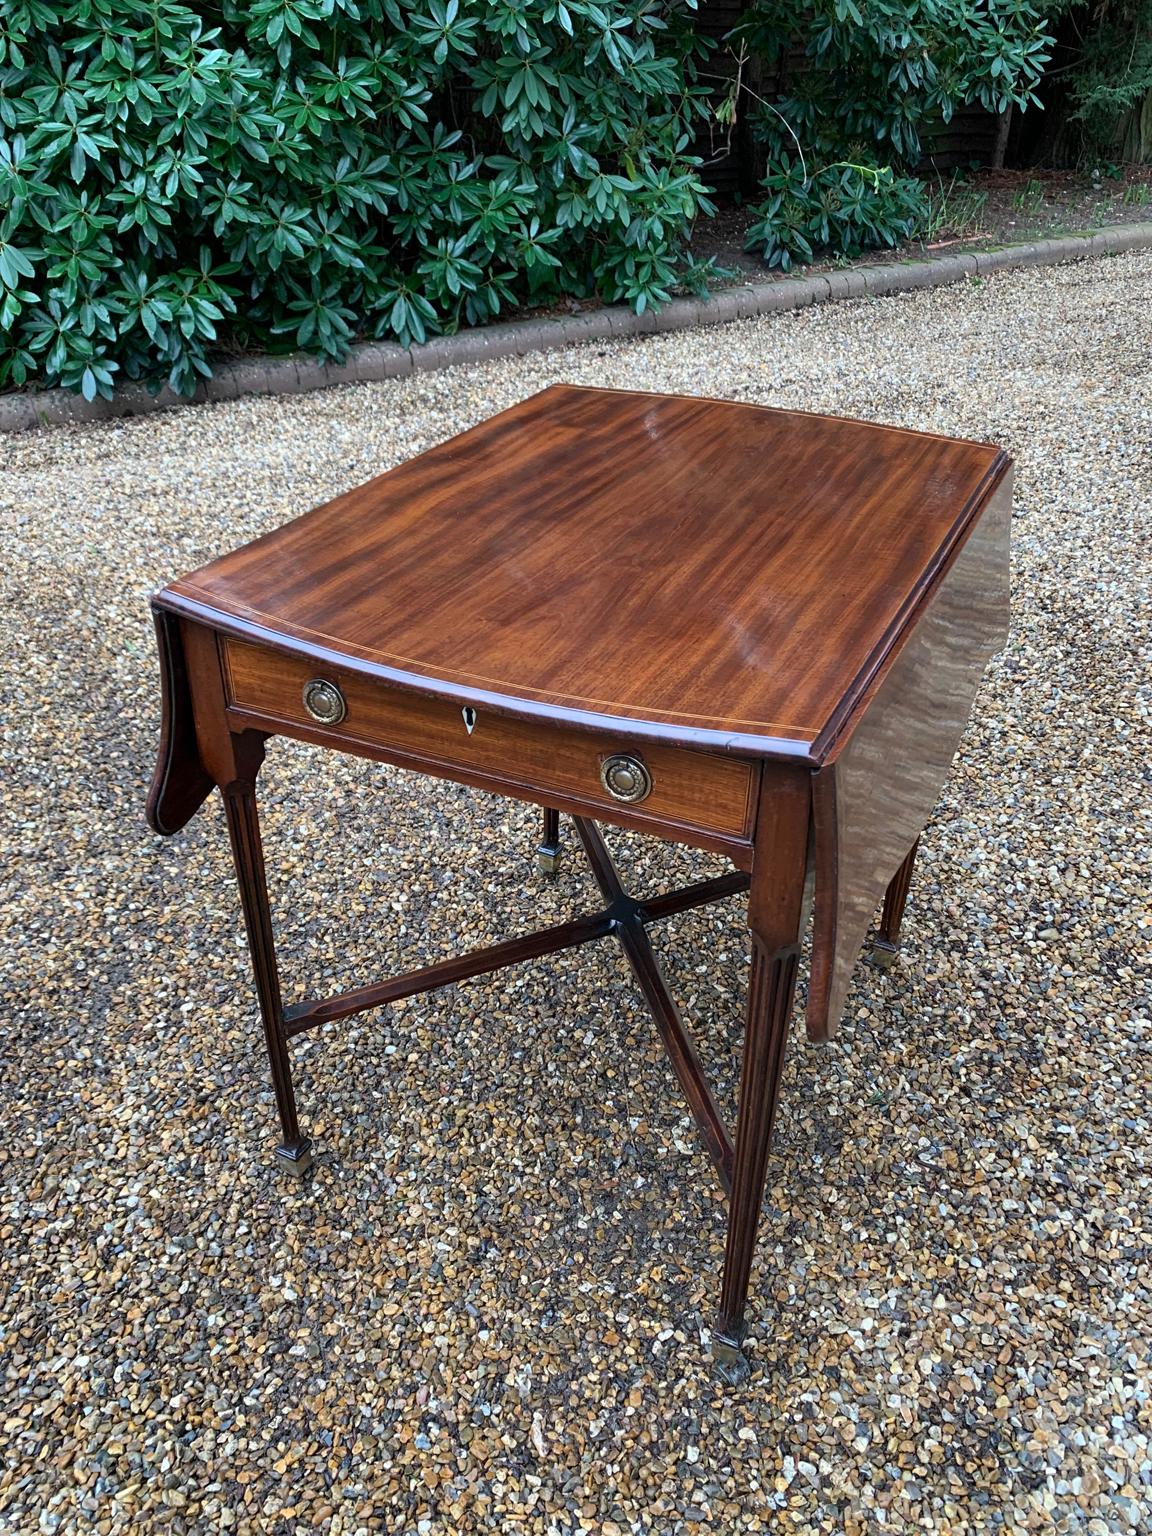 A very good quality 18th century mahogany pembroke butterfly / serpentine table, with an inlaid edge on top, a single drawer and standing on elegant square tapered legs supports united by ‘X’ stretcher with brass castors to base.